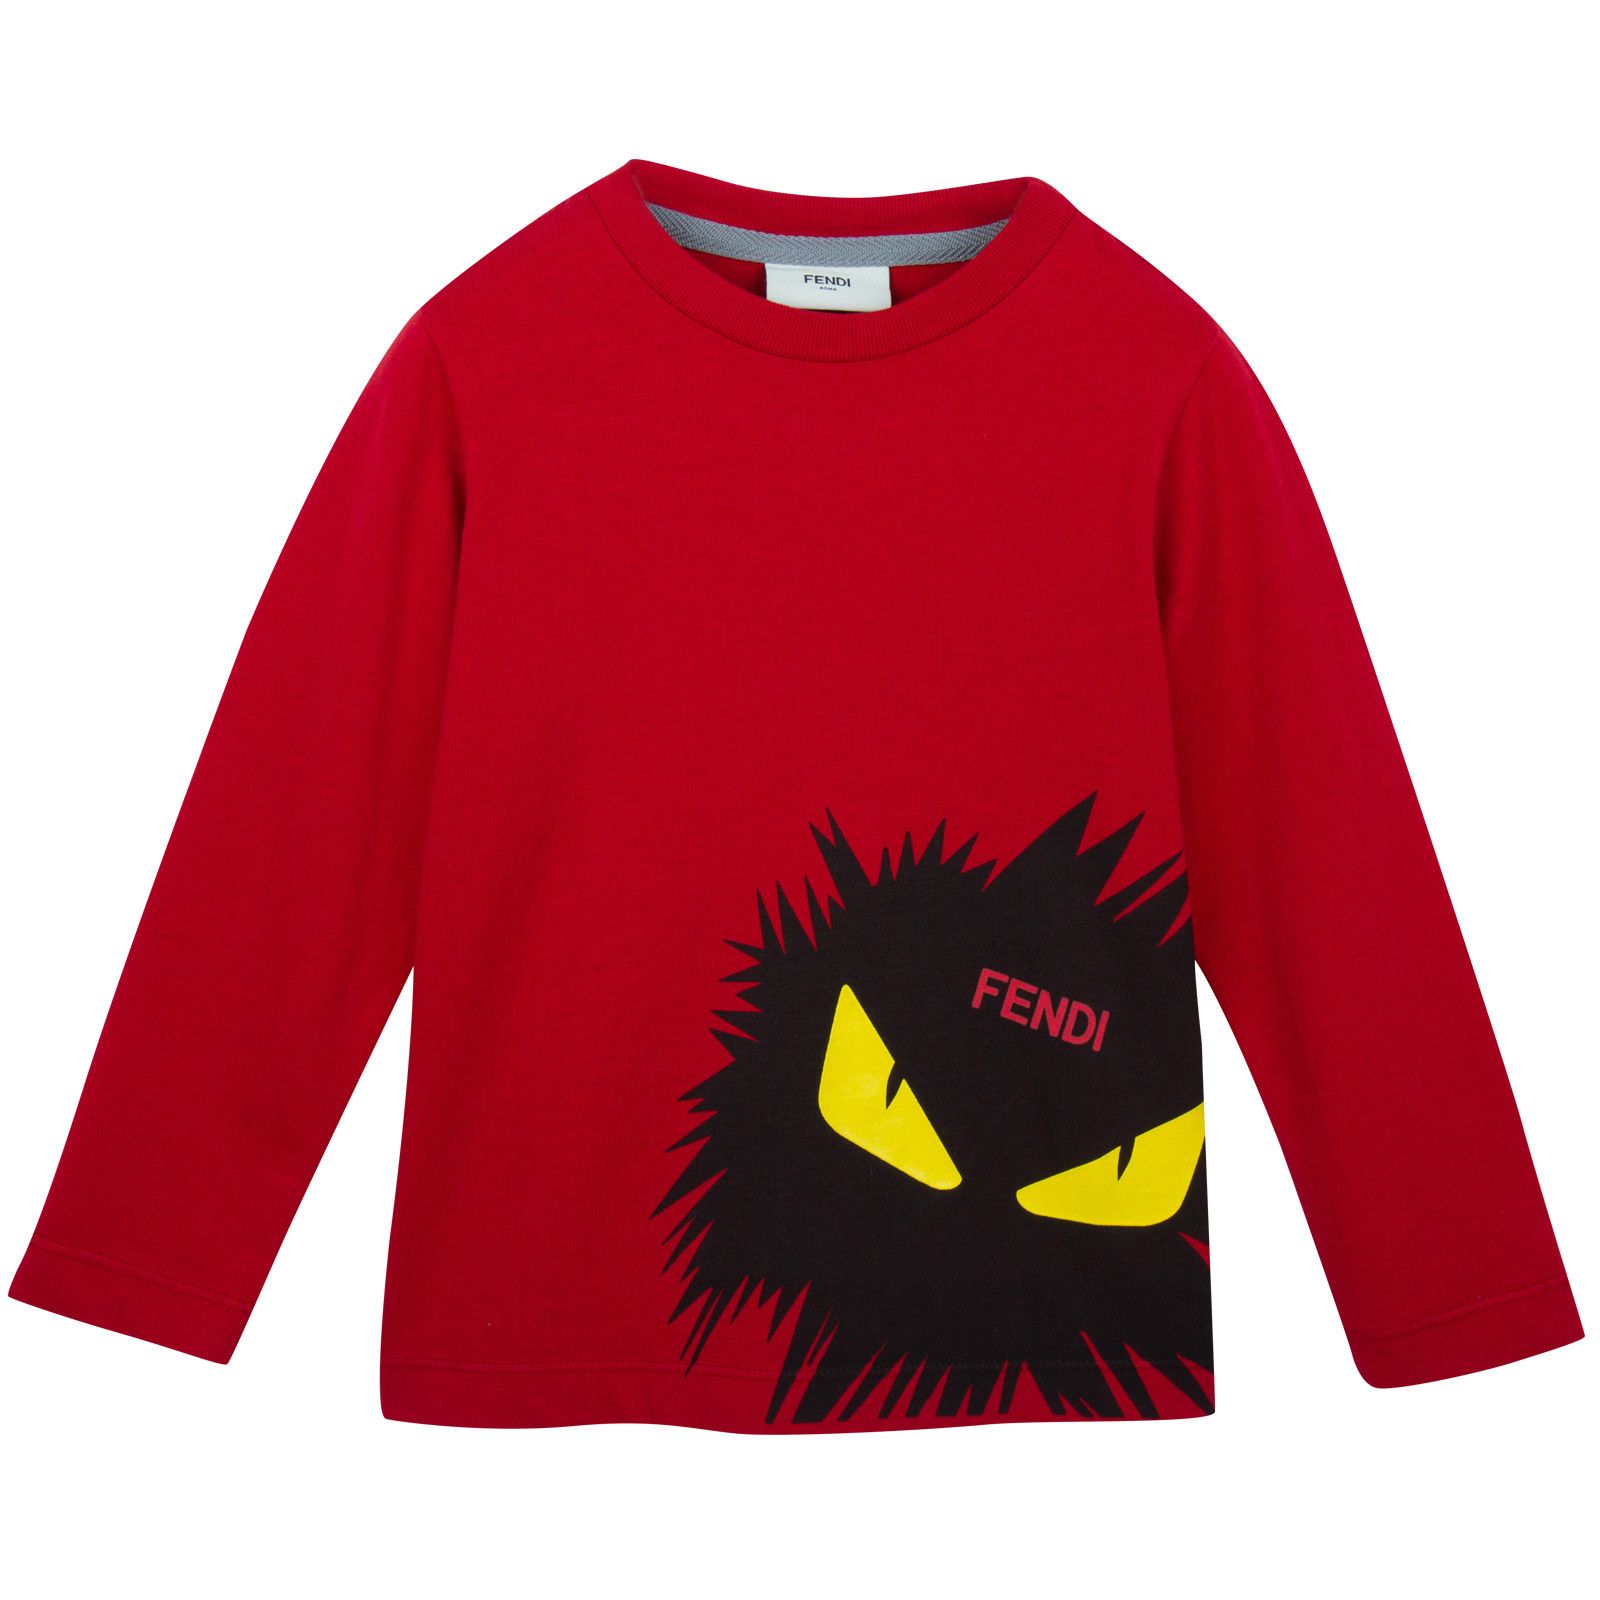 Boys Red Cotton T-Shirt With Monster Logo - CÉMAROSE | Children's Fashion Store - 1